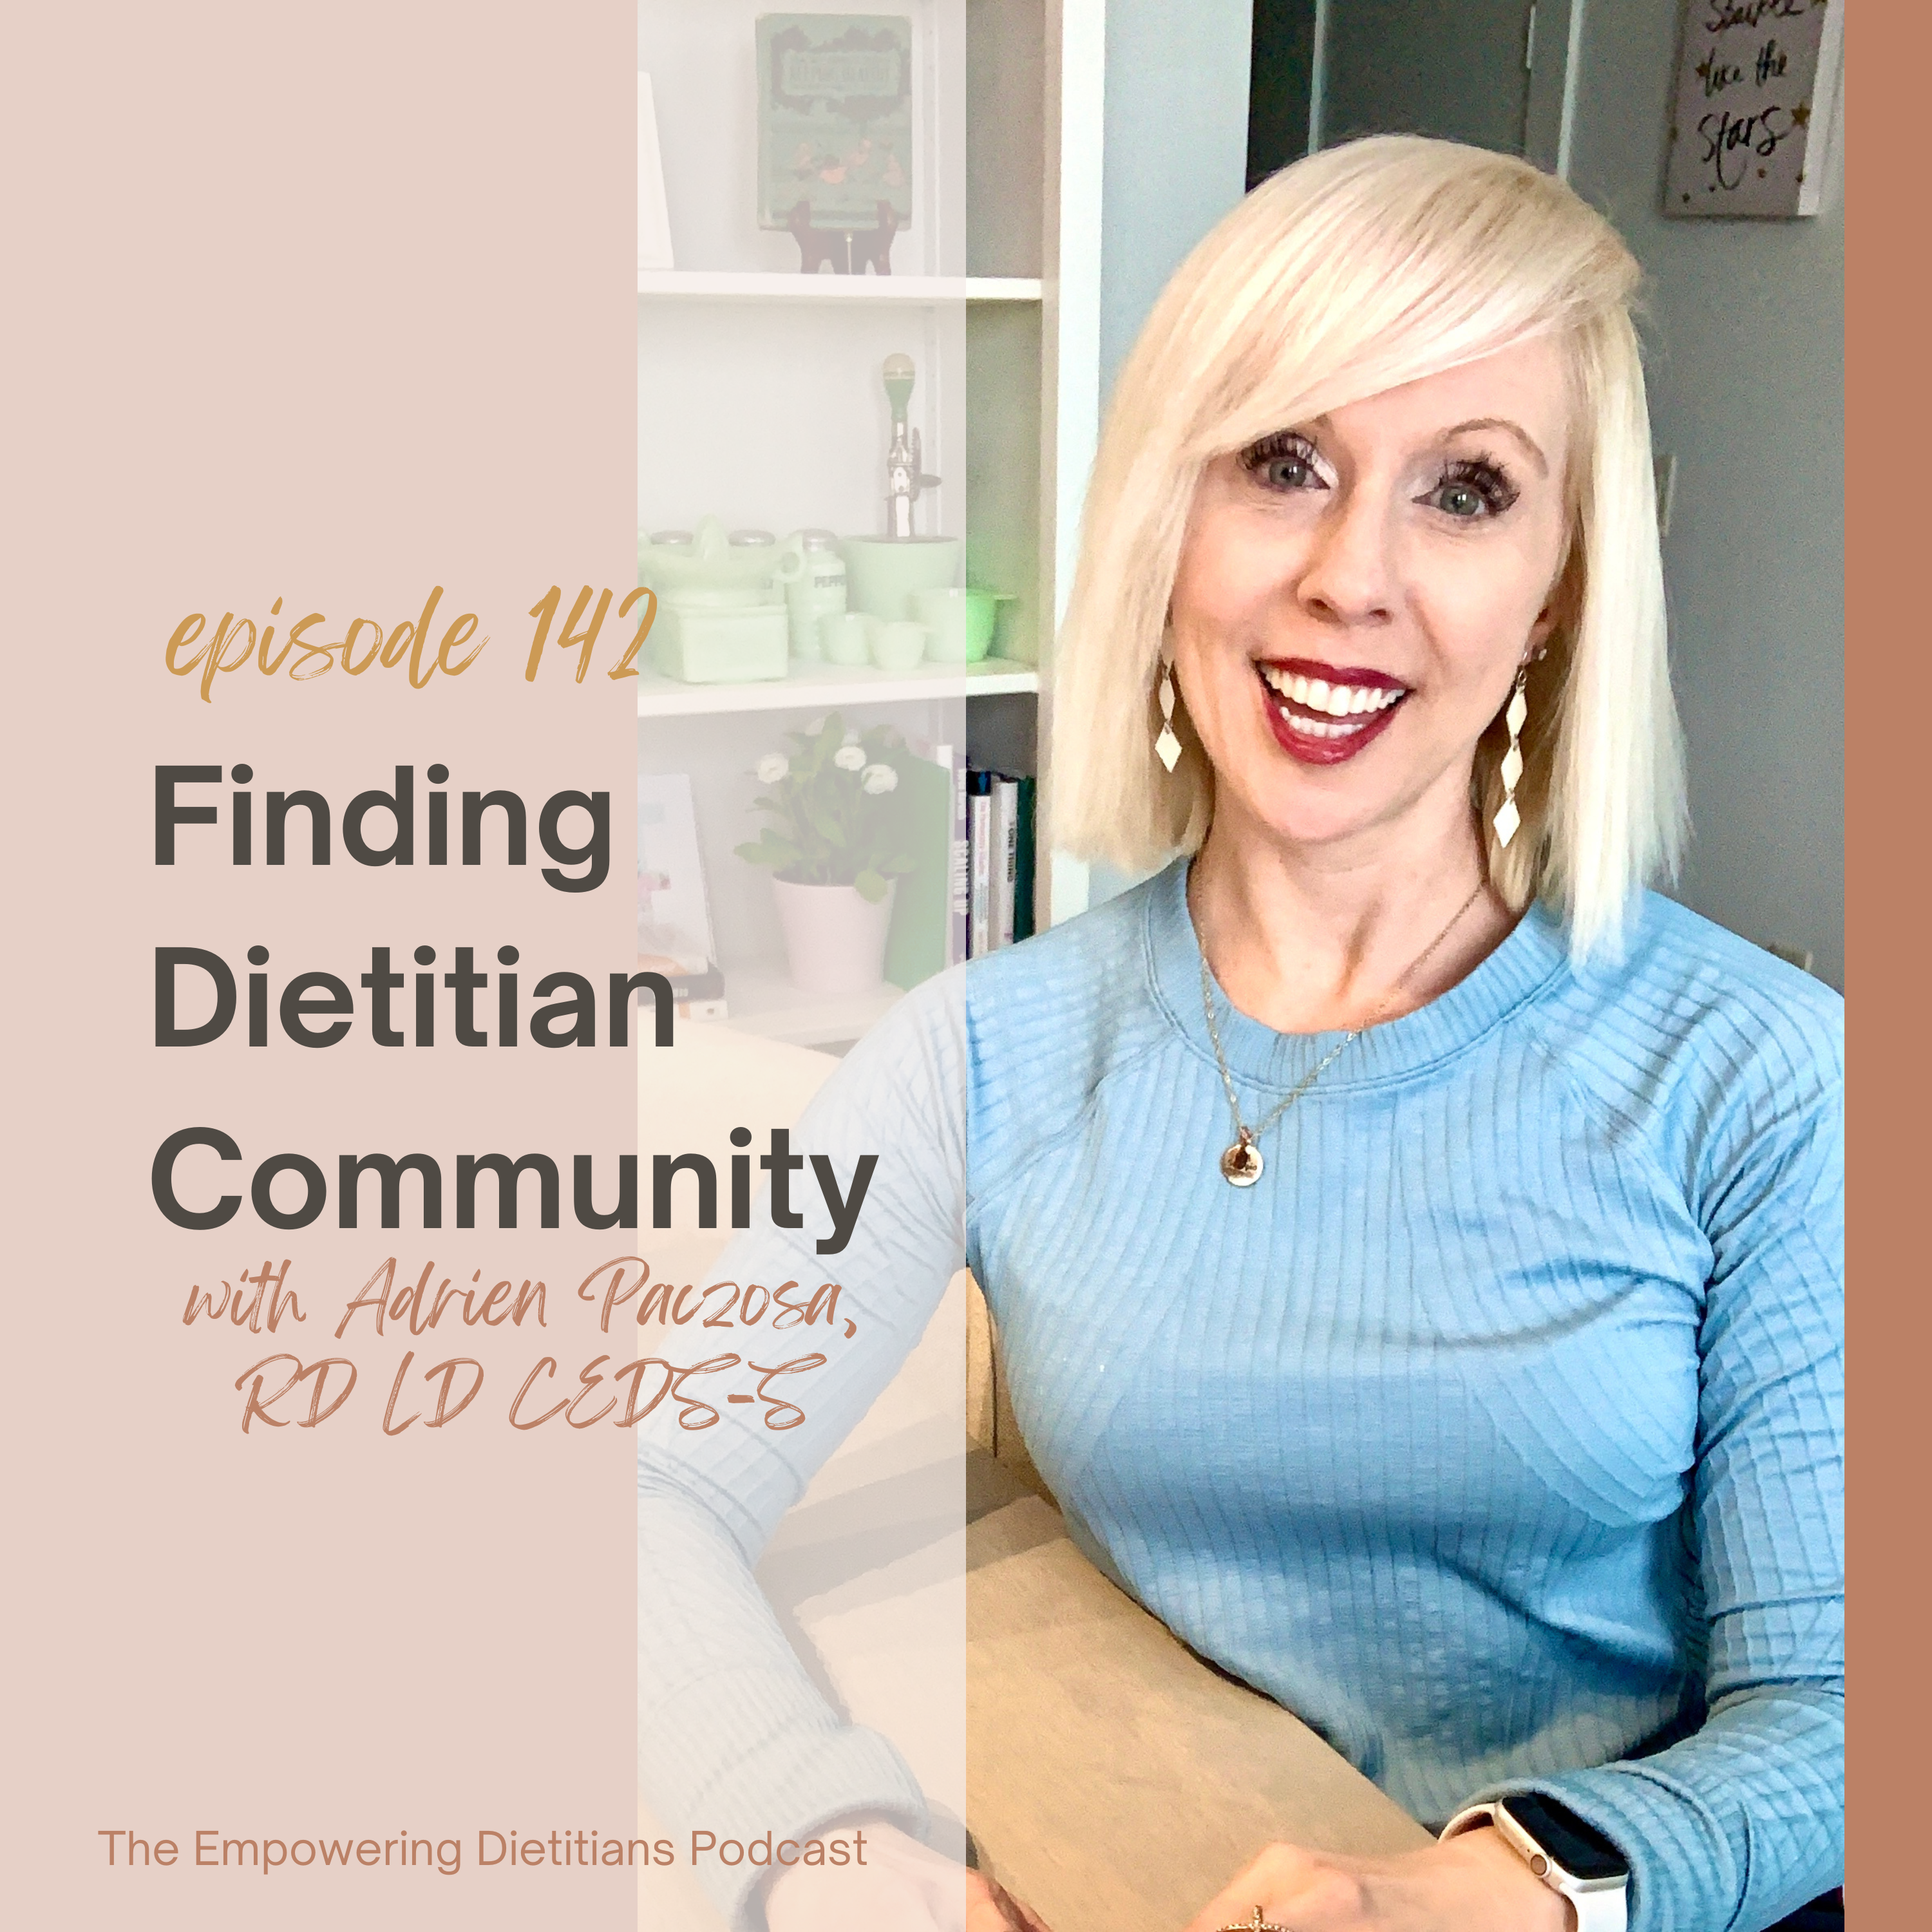 Finding Dietitian Community with Adrien Paczosa